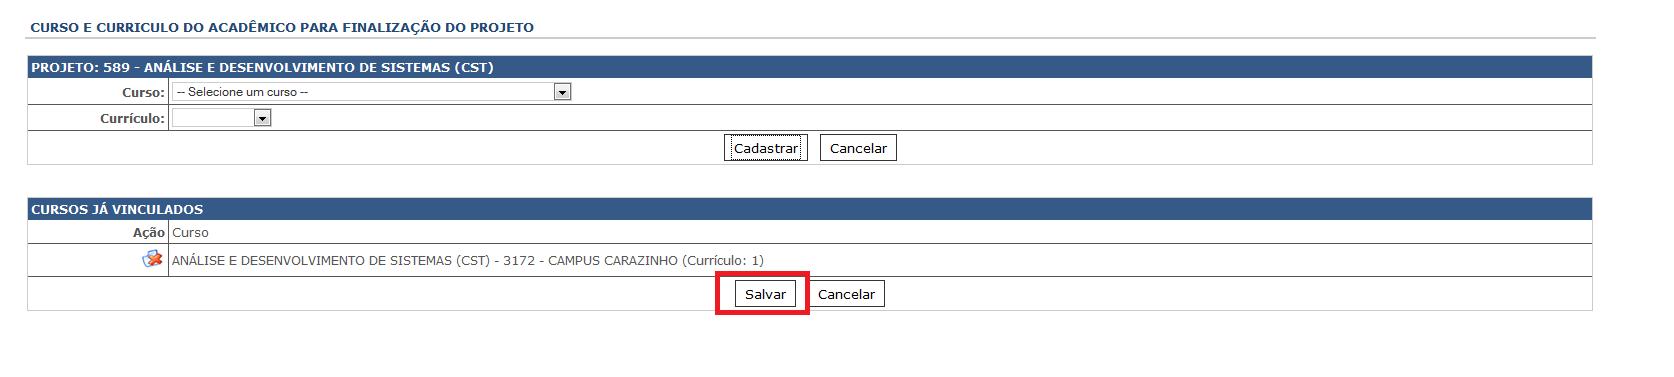 Confirmacao-sel-curso-curriculo.png